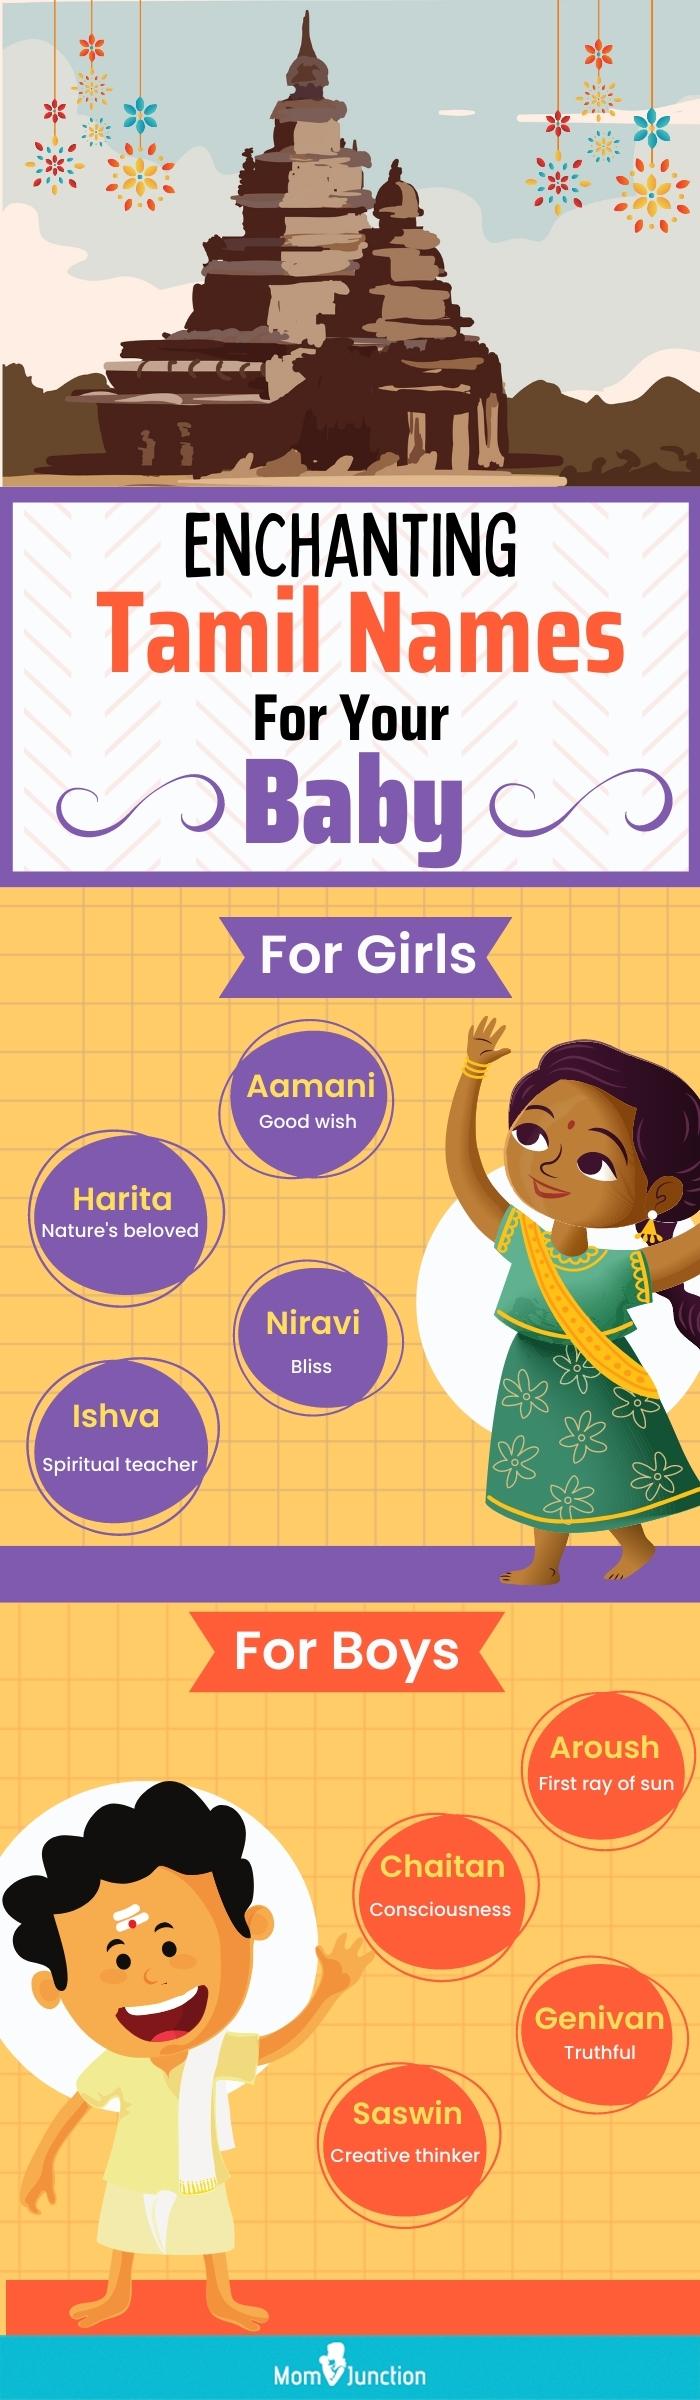 enchanting tamil names for your baby (infographic)